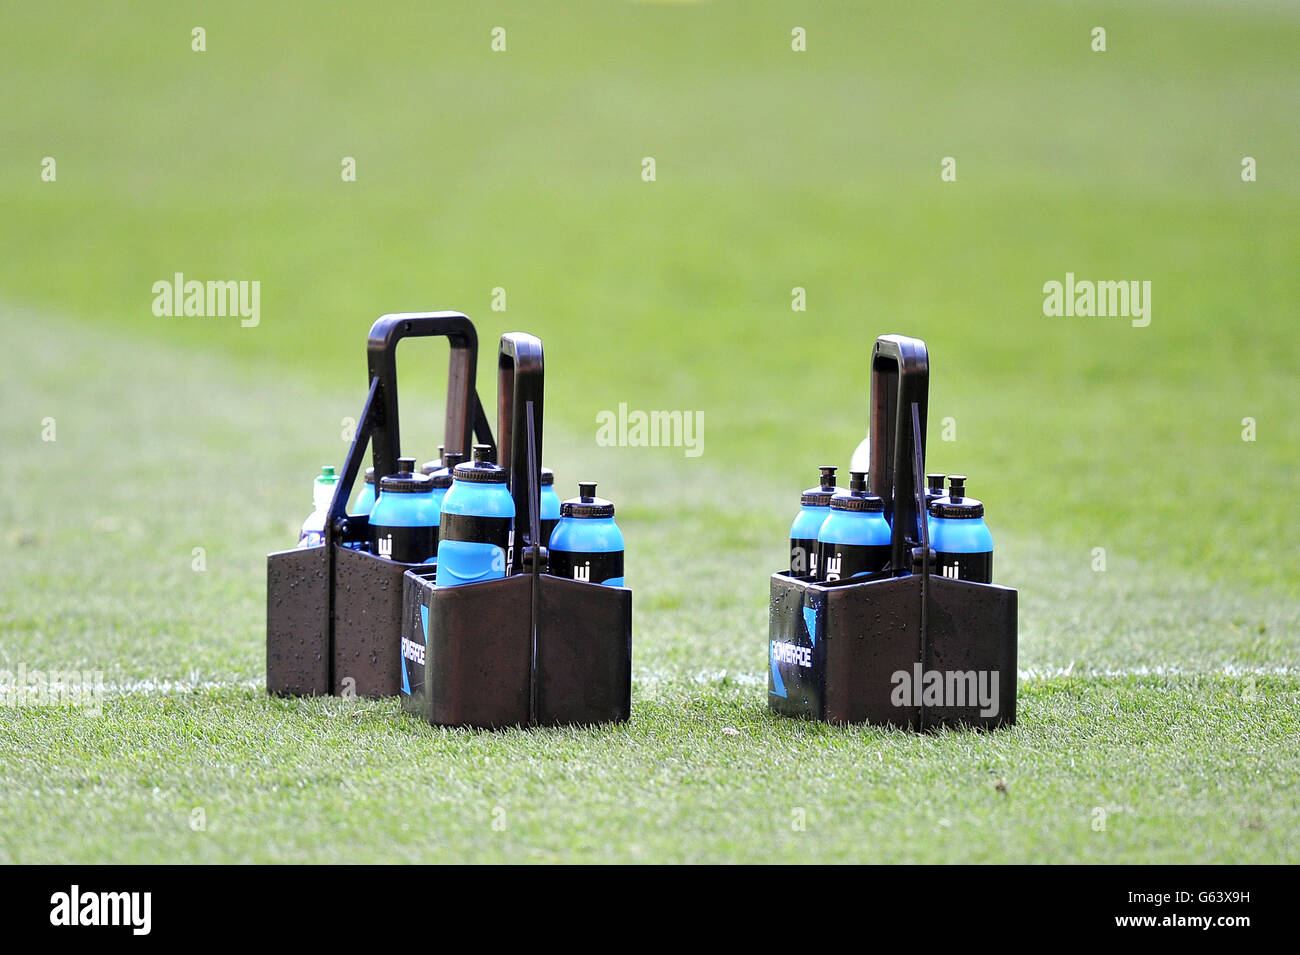 https://c8.alamy.com/comp/G63X9H/a-general-view-of-powerade-branded-drinks-bottles-and-bottle-holders-G63X9H.jpg